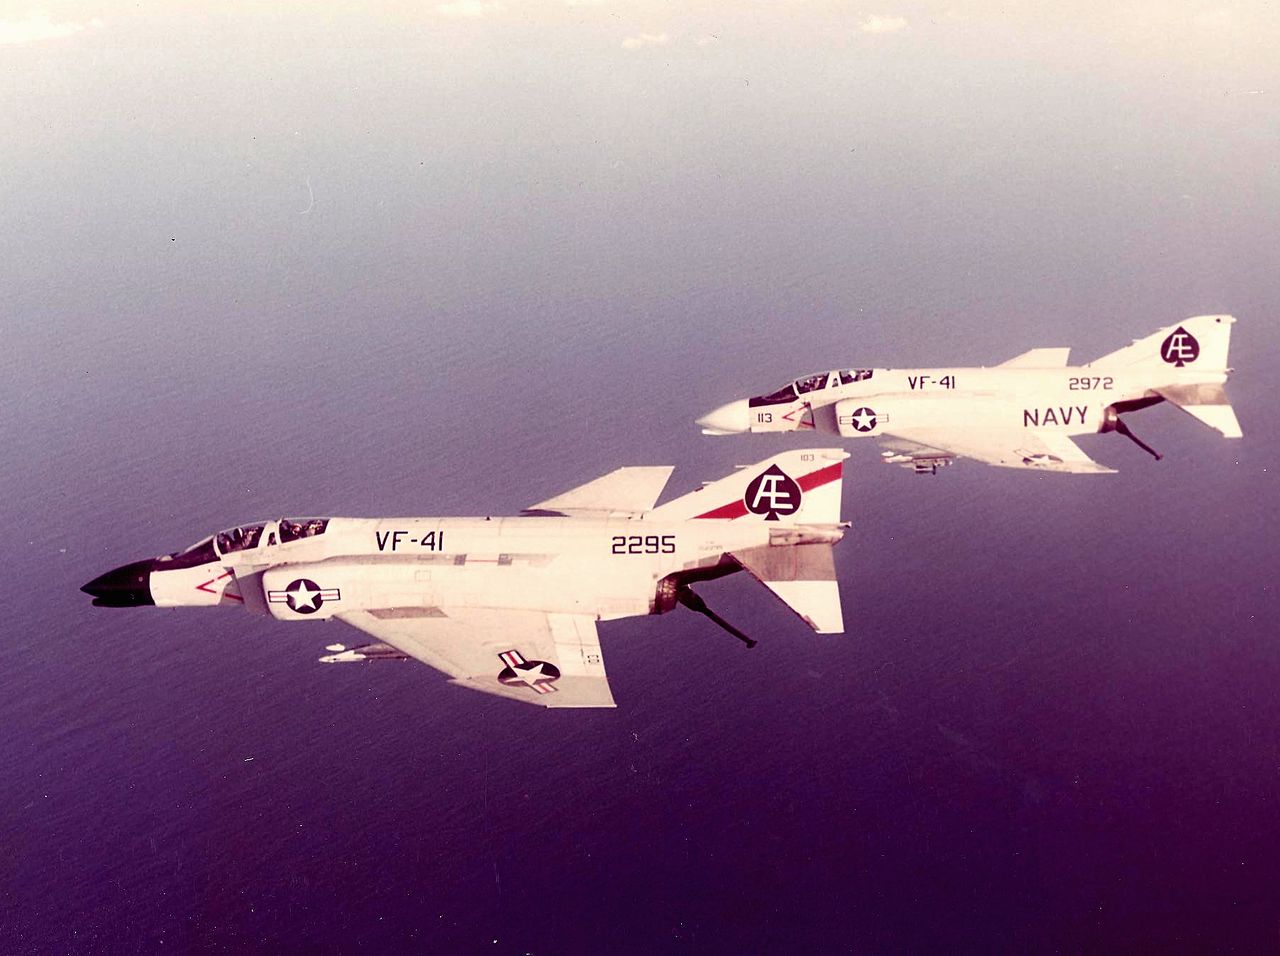 US Navy F-4 pilot tells the story of when his skipper flew straight for China after his compass precessed during a MIGCAP mission over North Vietnam